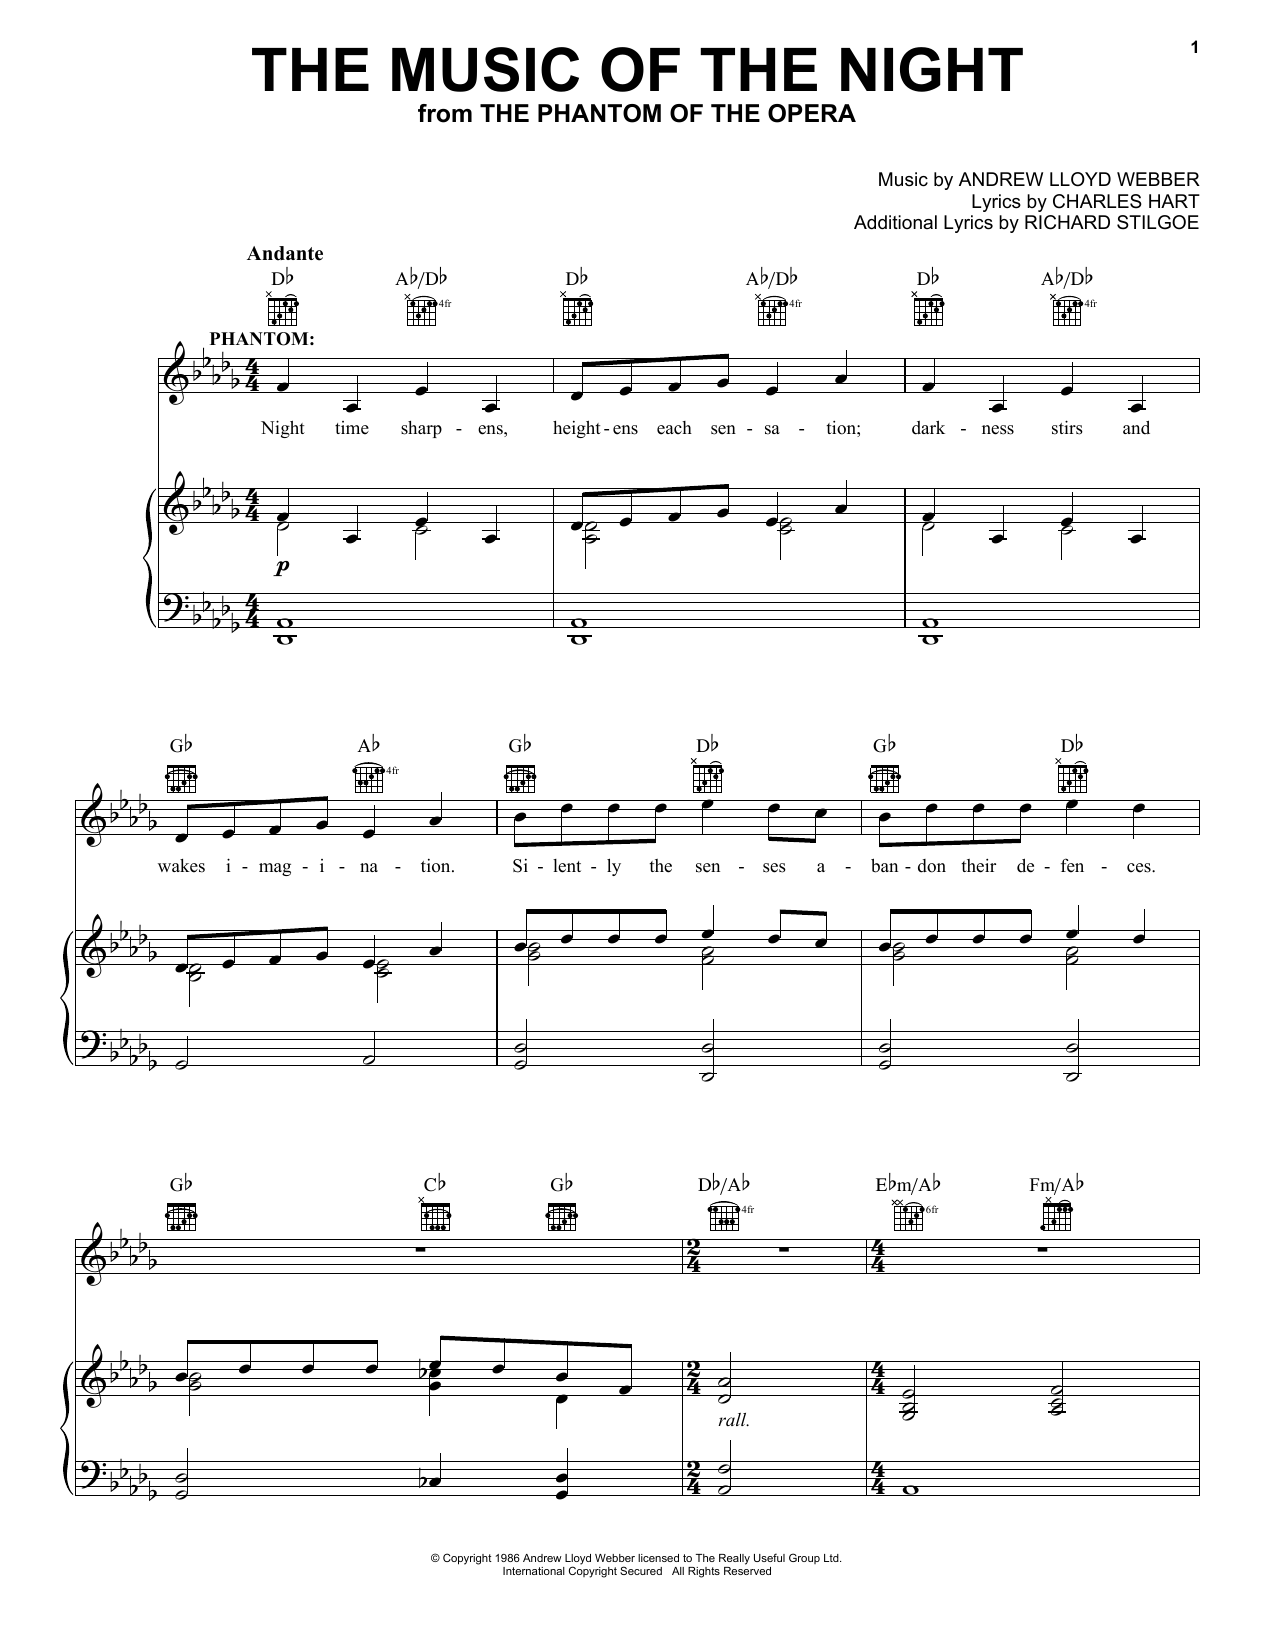 Andrew Lloyd Webber The Music Of The Night sheet music notes and chords. Download Printable PDF.